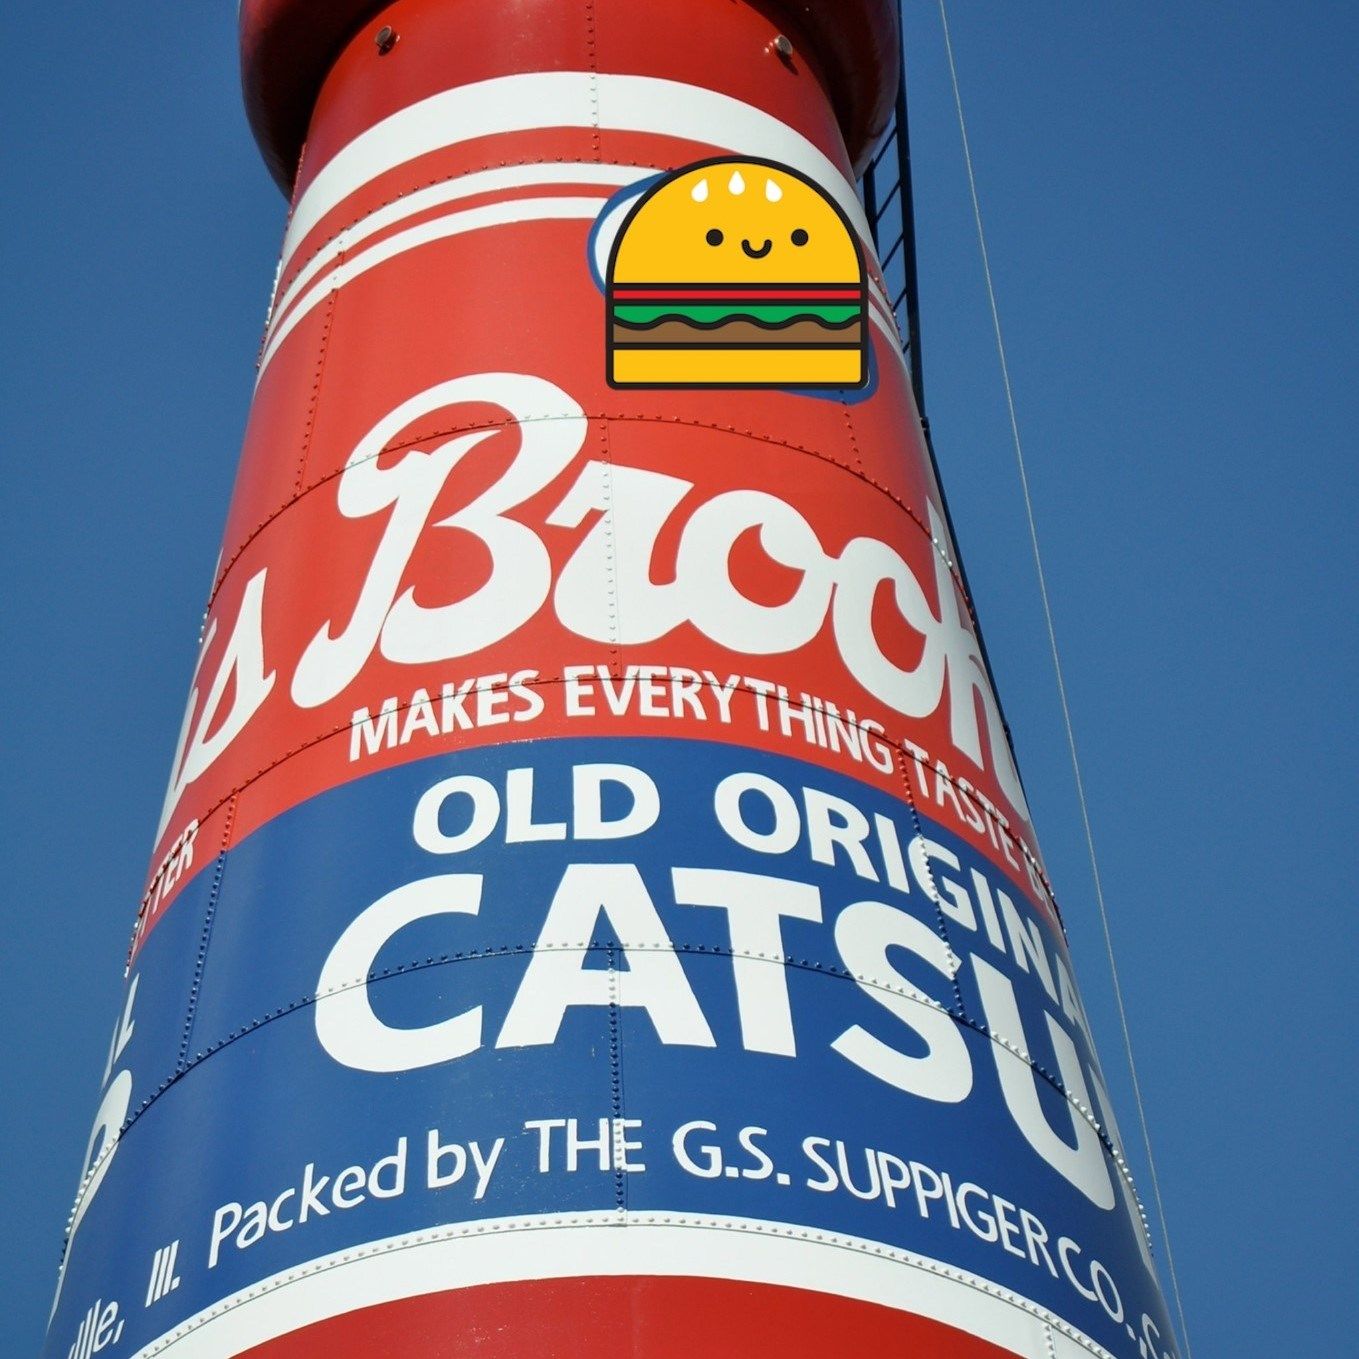 World's Largest Catsup Bottle Sculpture, world record in Collinsville, Illinois
